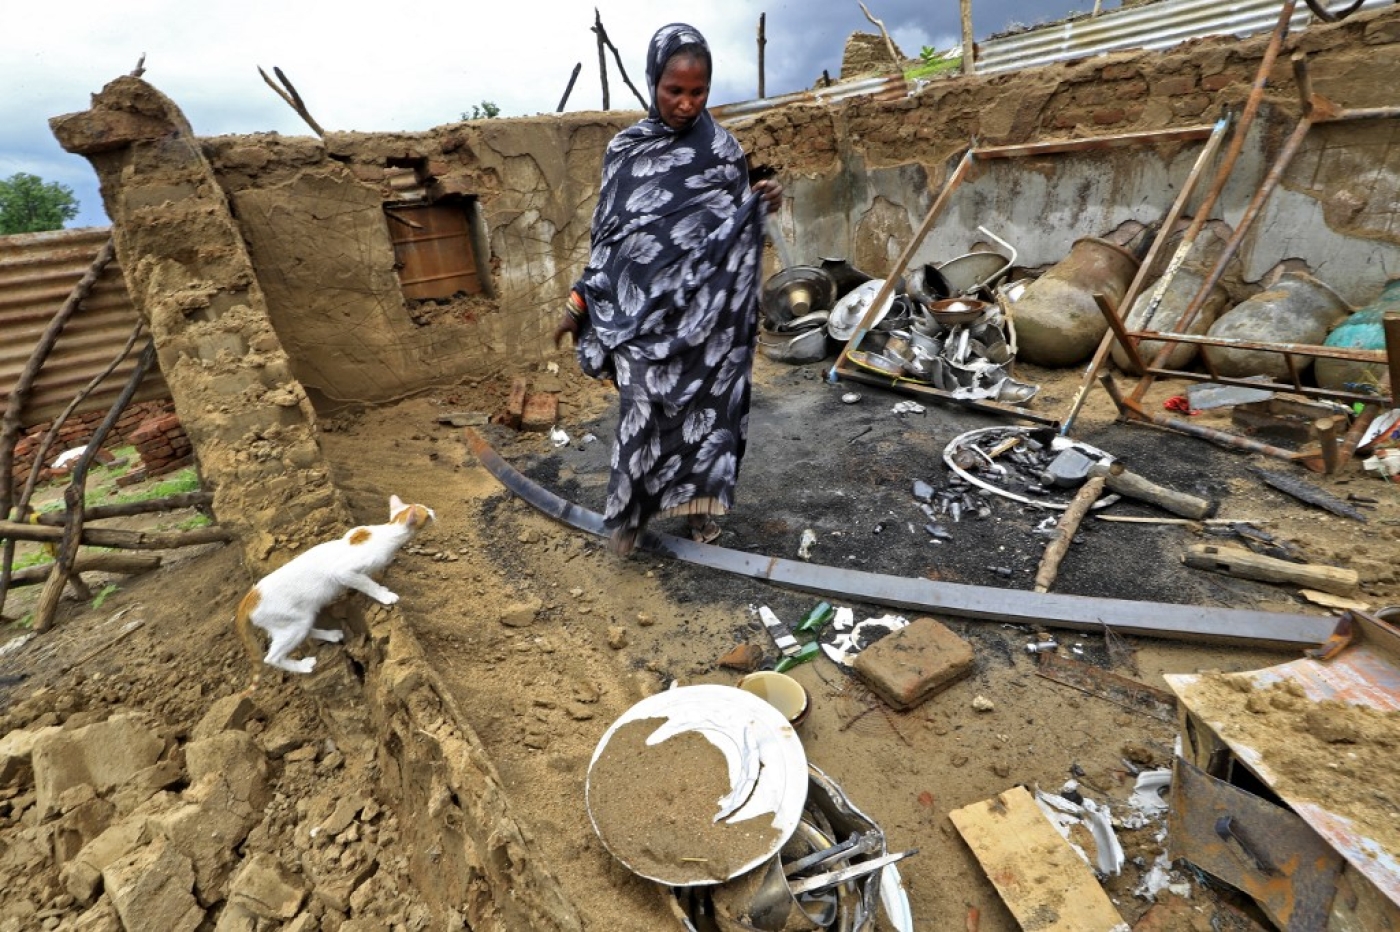 A woman surveys the damage to her house after tribal clashes in al-Roseires, in Sudan's Blue Nile state, earlier this year, 8 August 2022 (AFP)